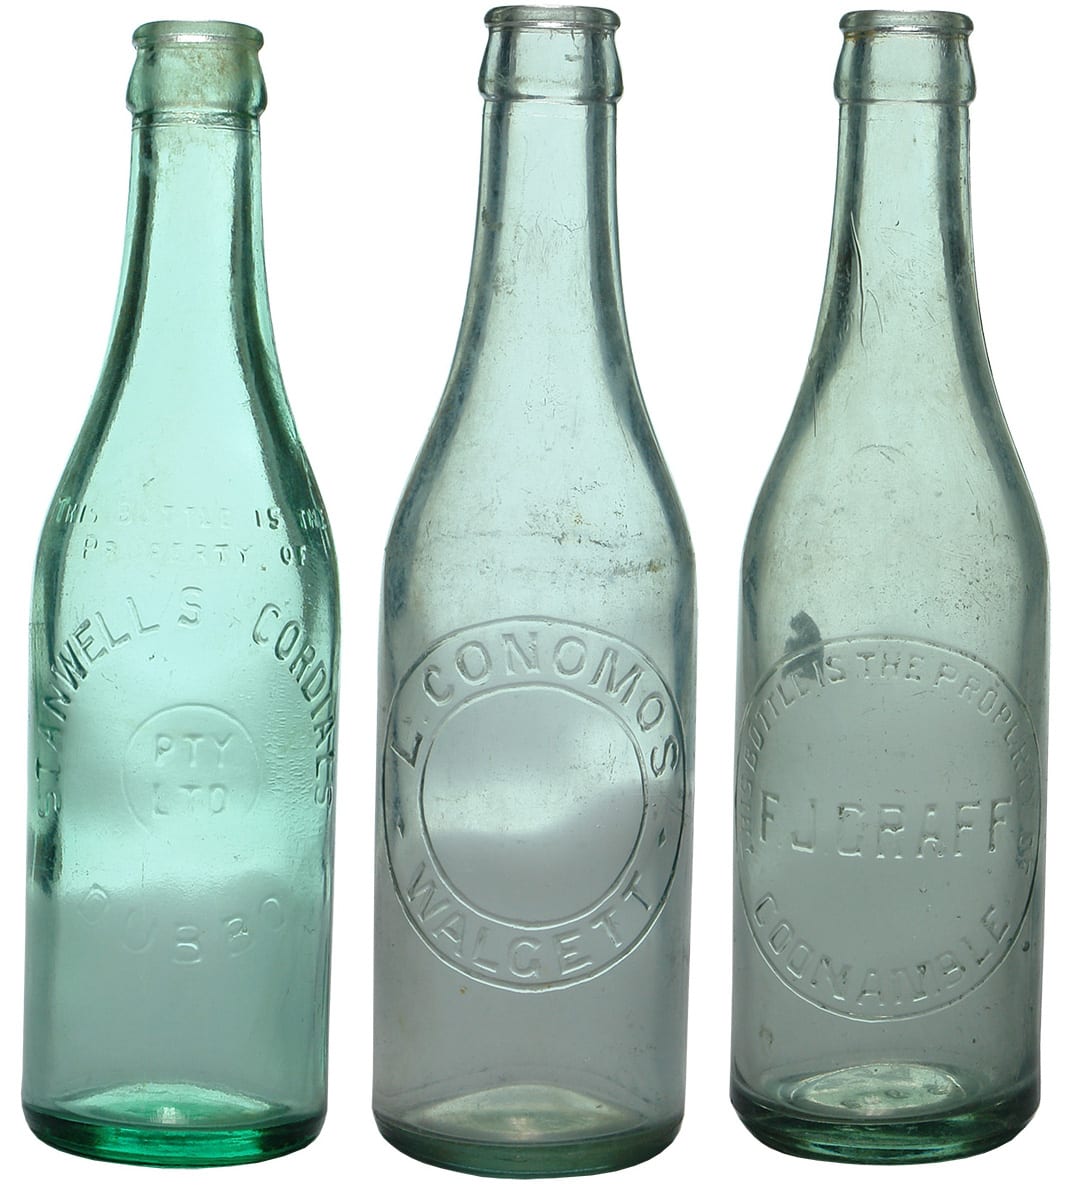 New South Wales Crown Seal Bottles